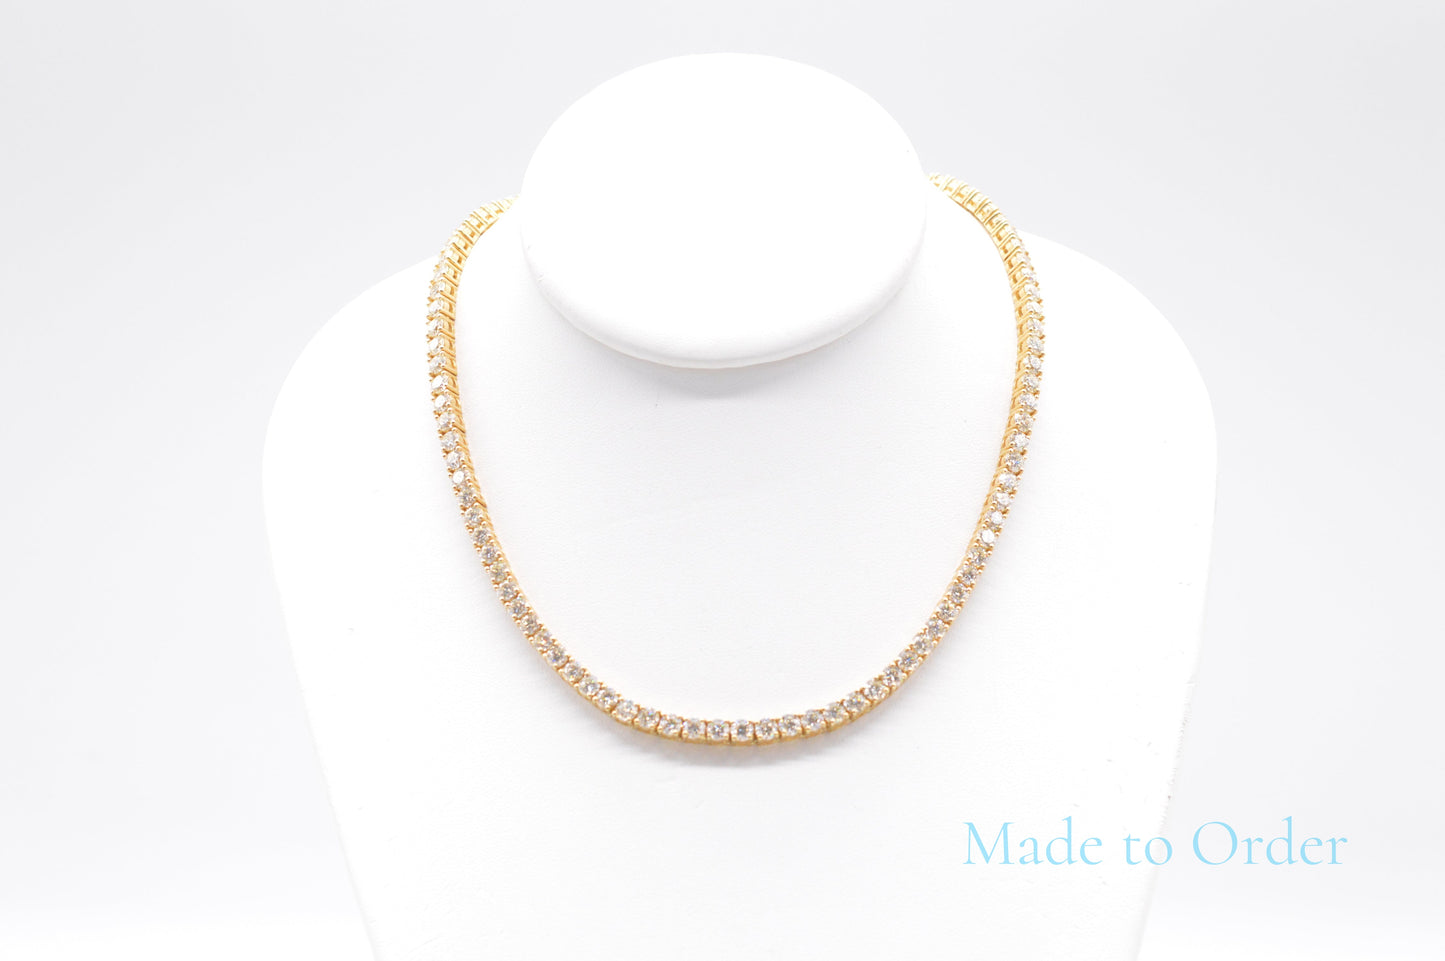 3.25mm Made to Order Natural Diamond Tennis Chain 14K Made to Order Natural Tennis Chains